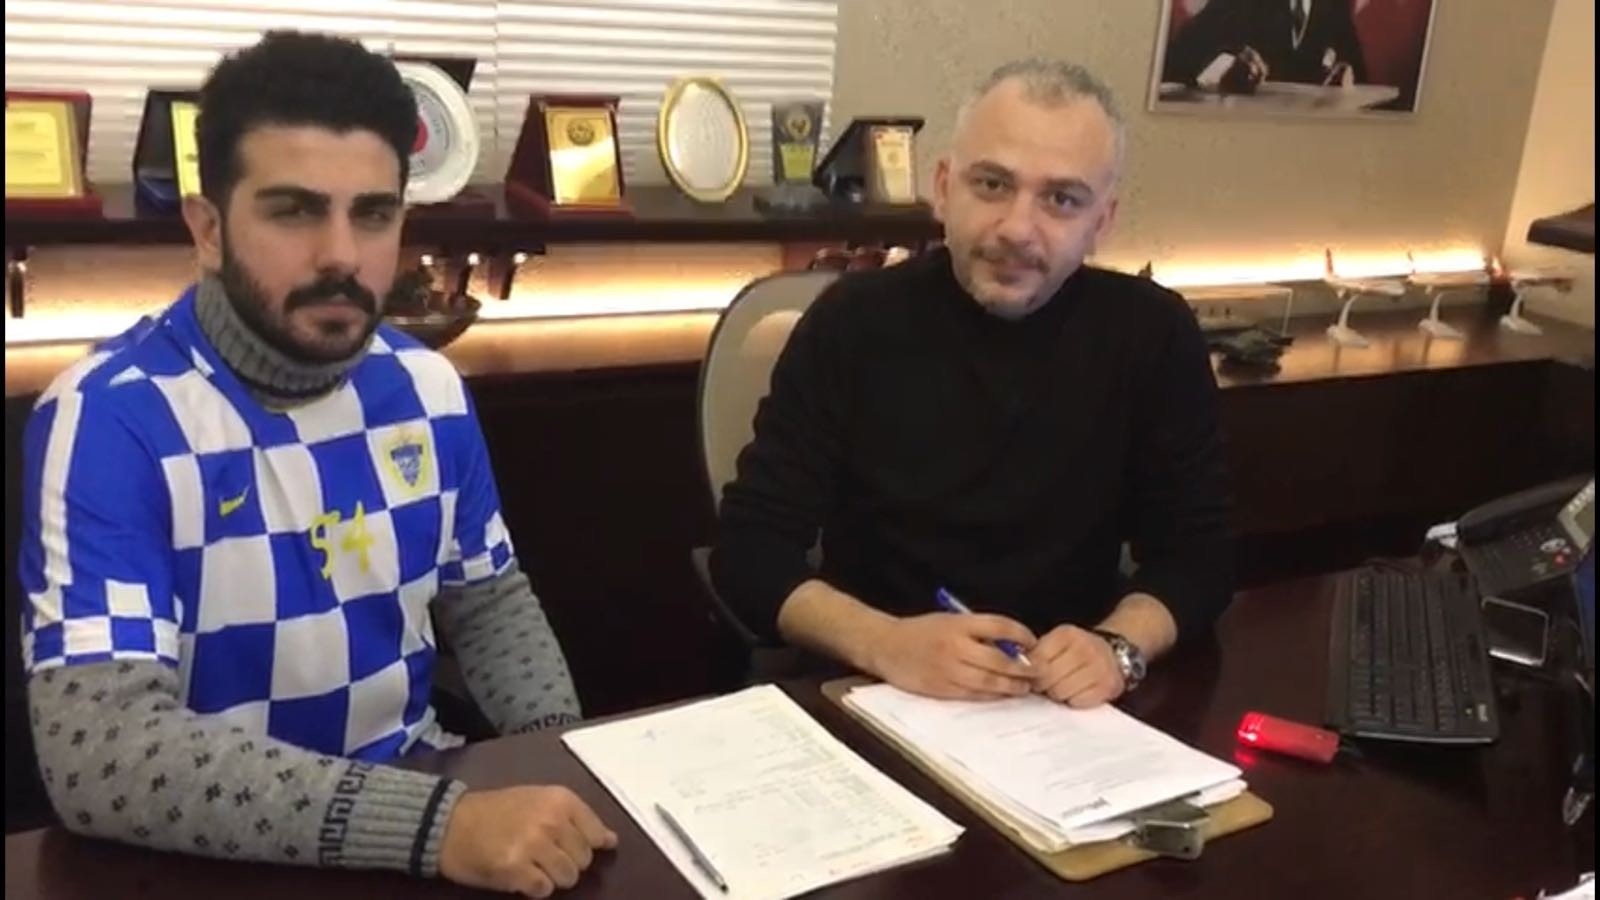 Turkish amateur-tier club Harunustaspor made global headlines at the start of the year by announcing it had carried out the worldu2019s first football transfer of a player in bitcoins. The club signed u00d6mer Faruk Ku0131rou011flu on Jan. 31.